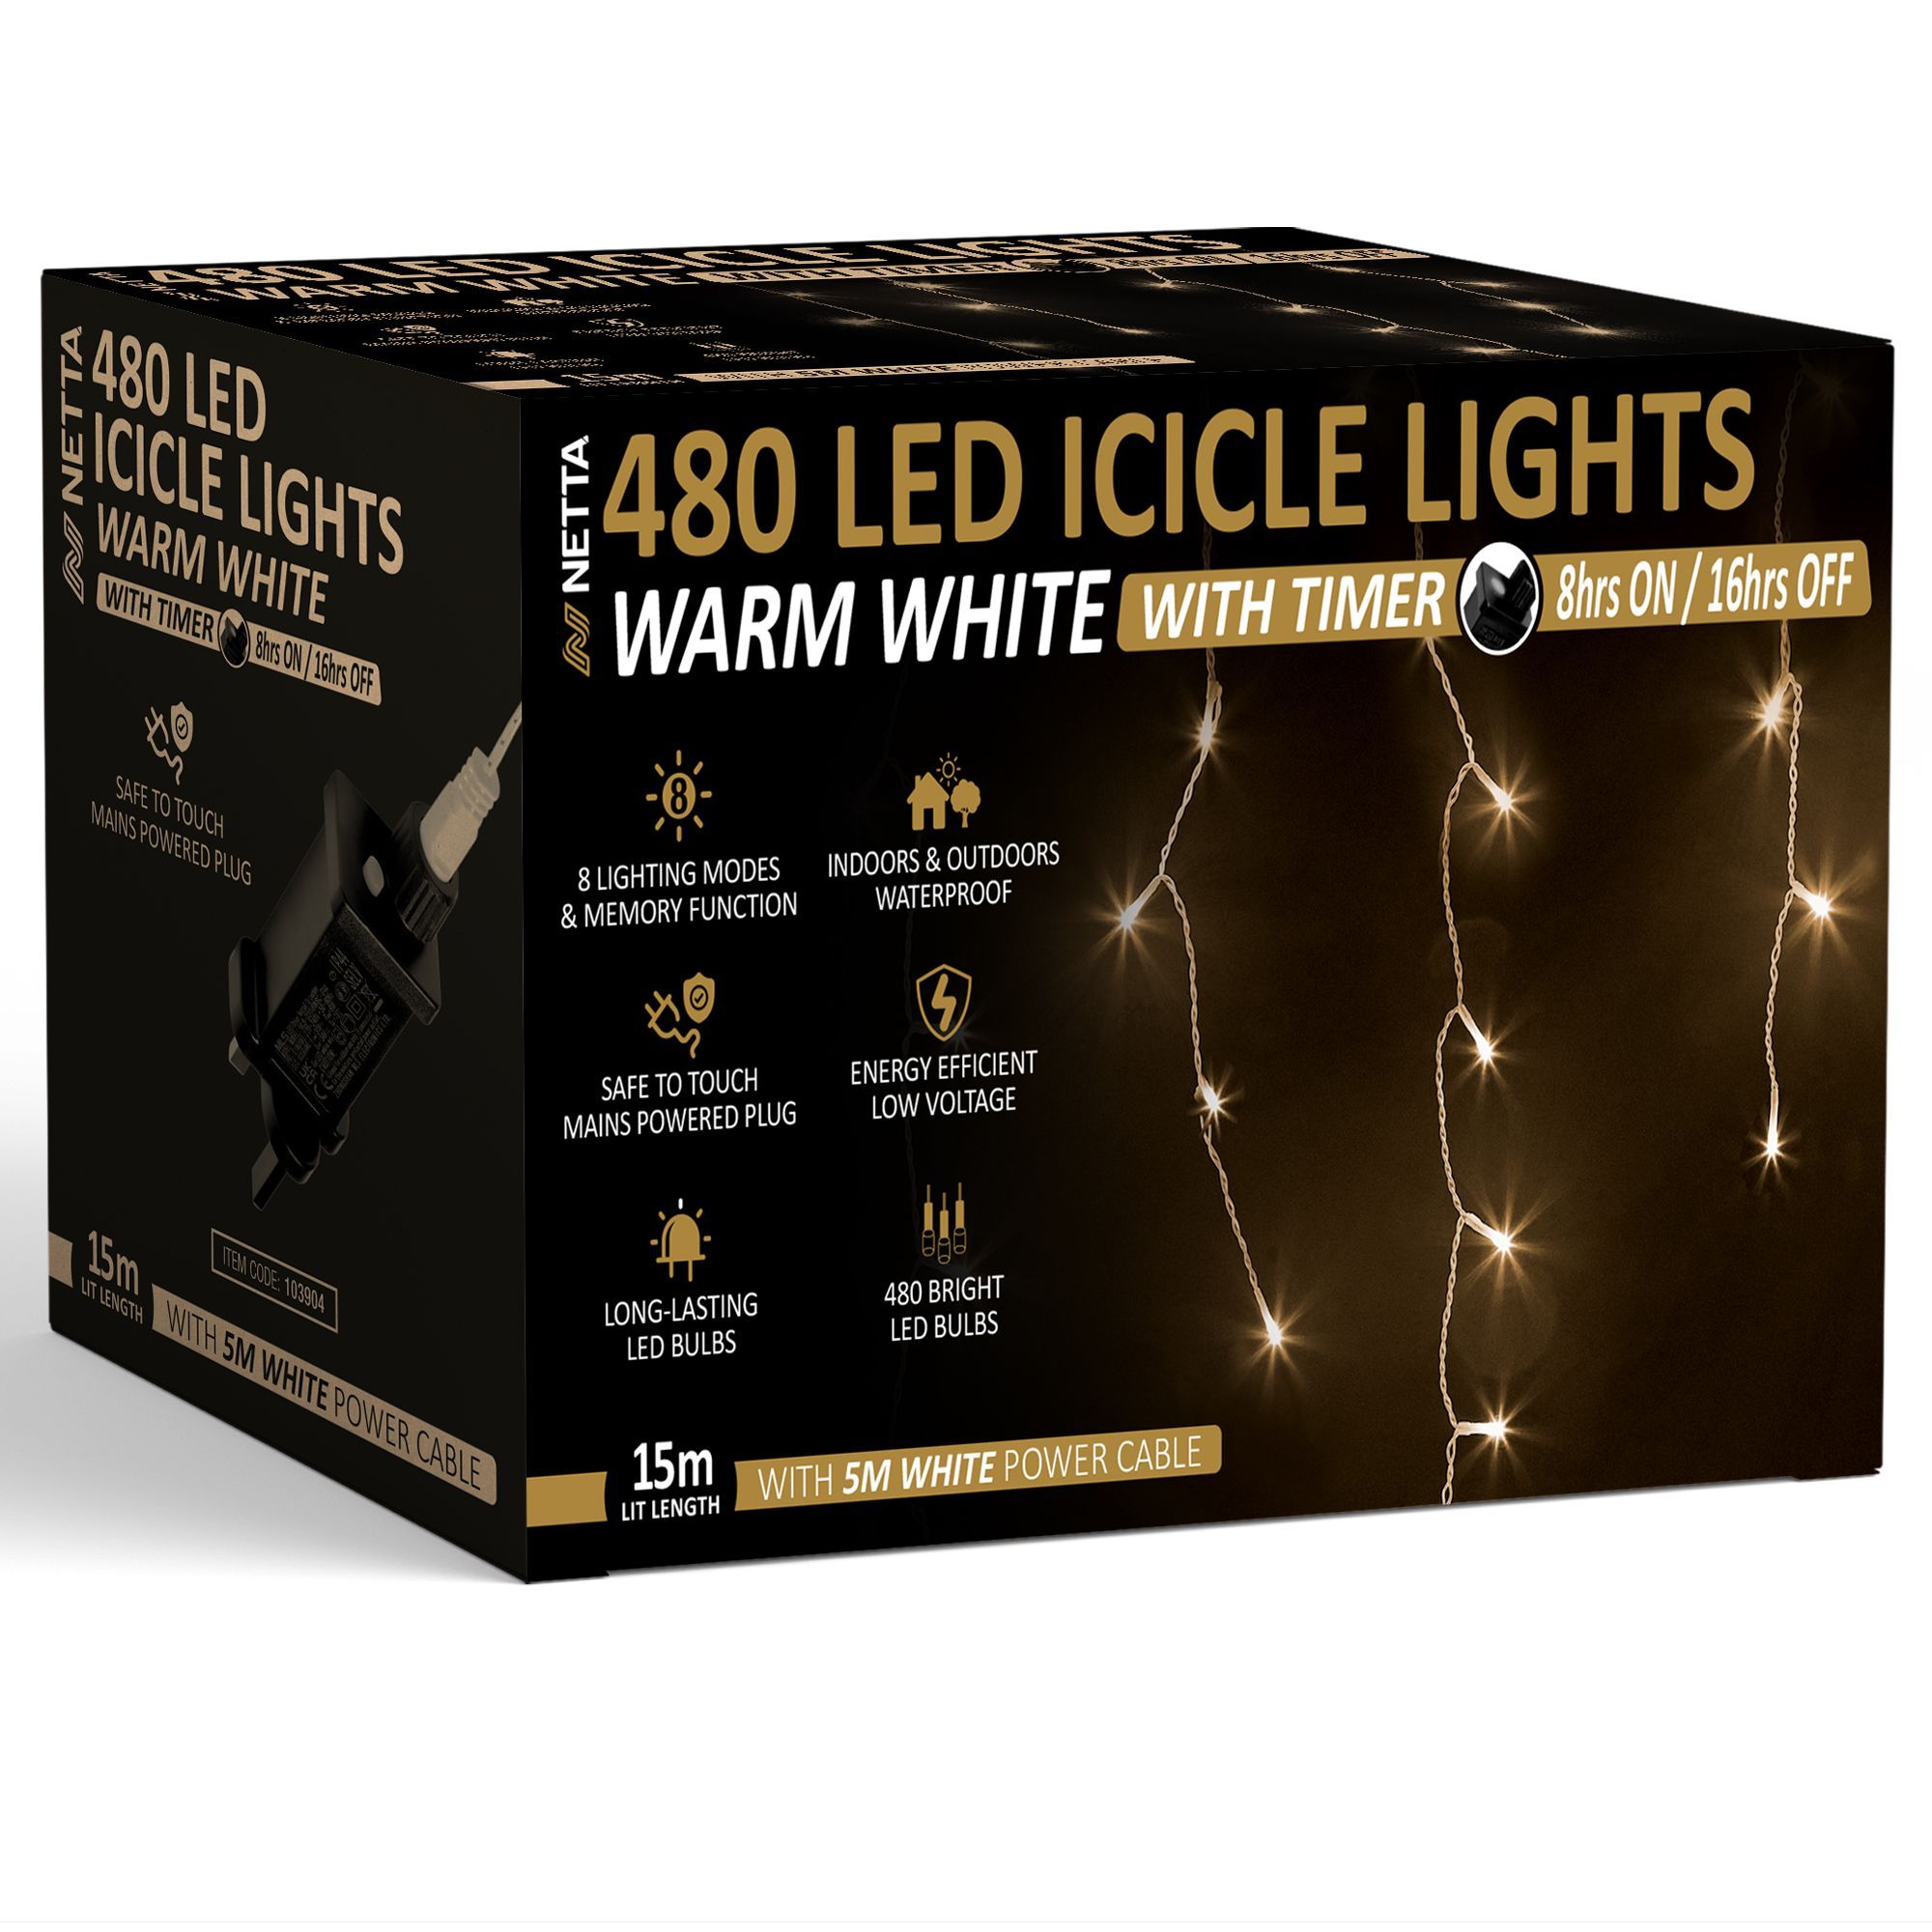 Icicle Lights 480 LED Outdoor Christmas Lights 15M Lit Length, Timer - Warm White, with White Cable